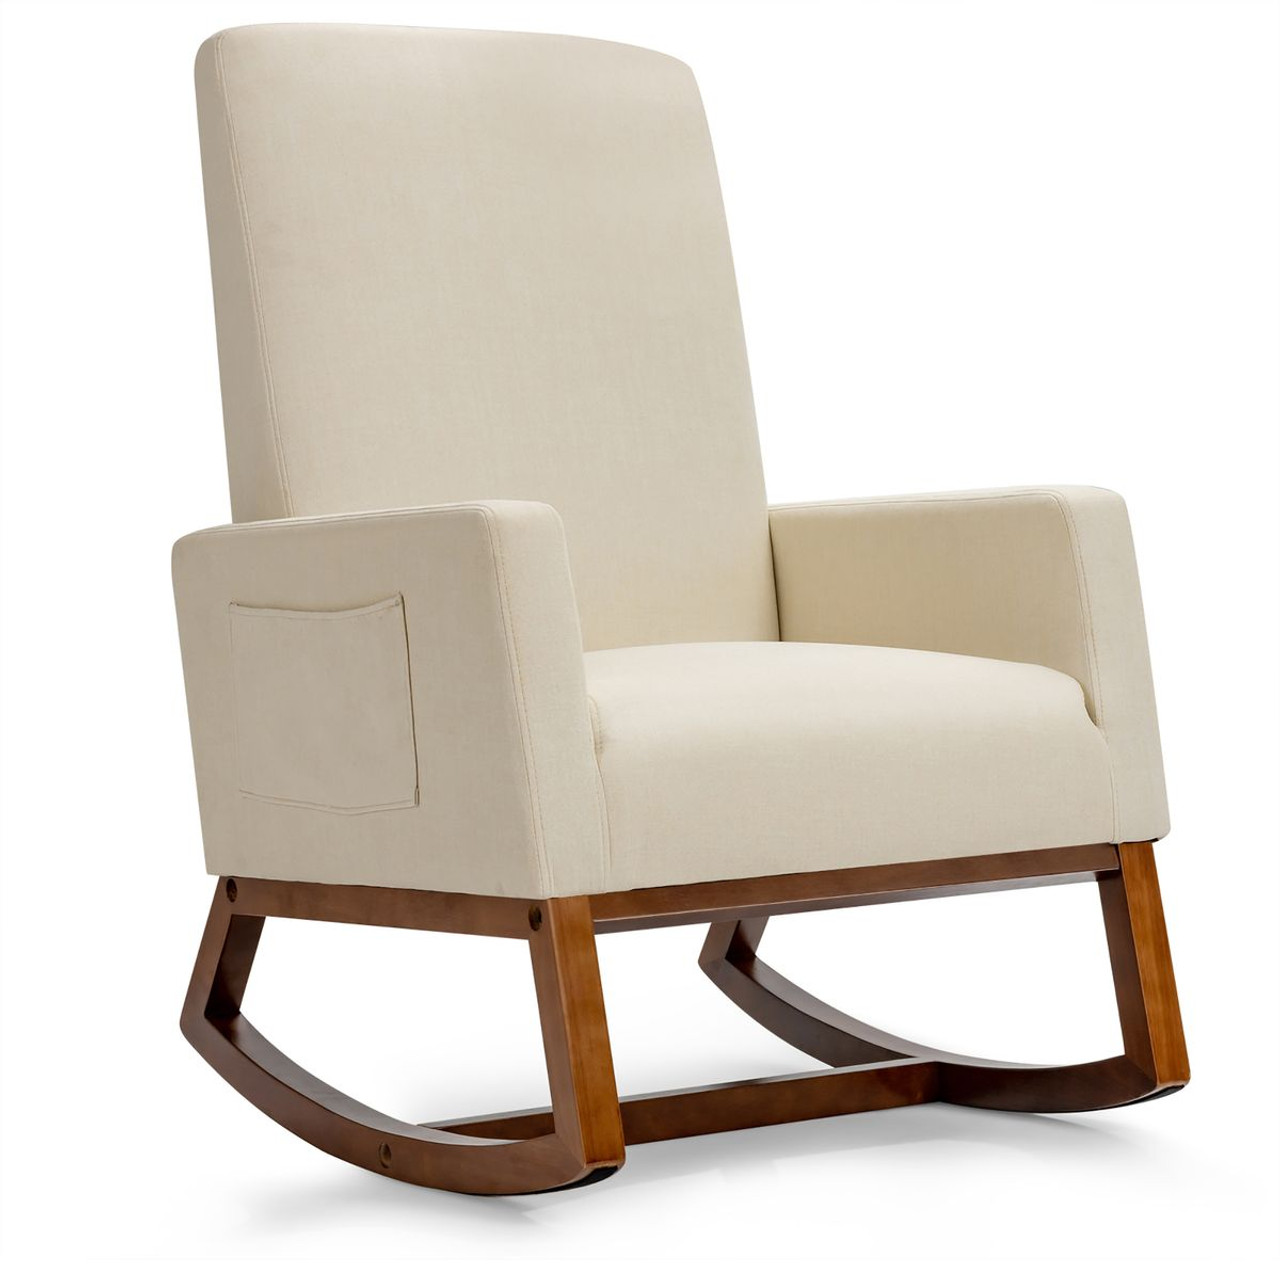 Rocking High-Back Upholstered Lounge Armchair with Side Pocket product image